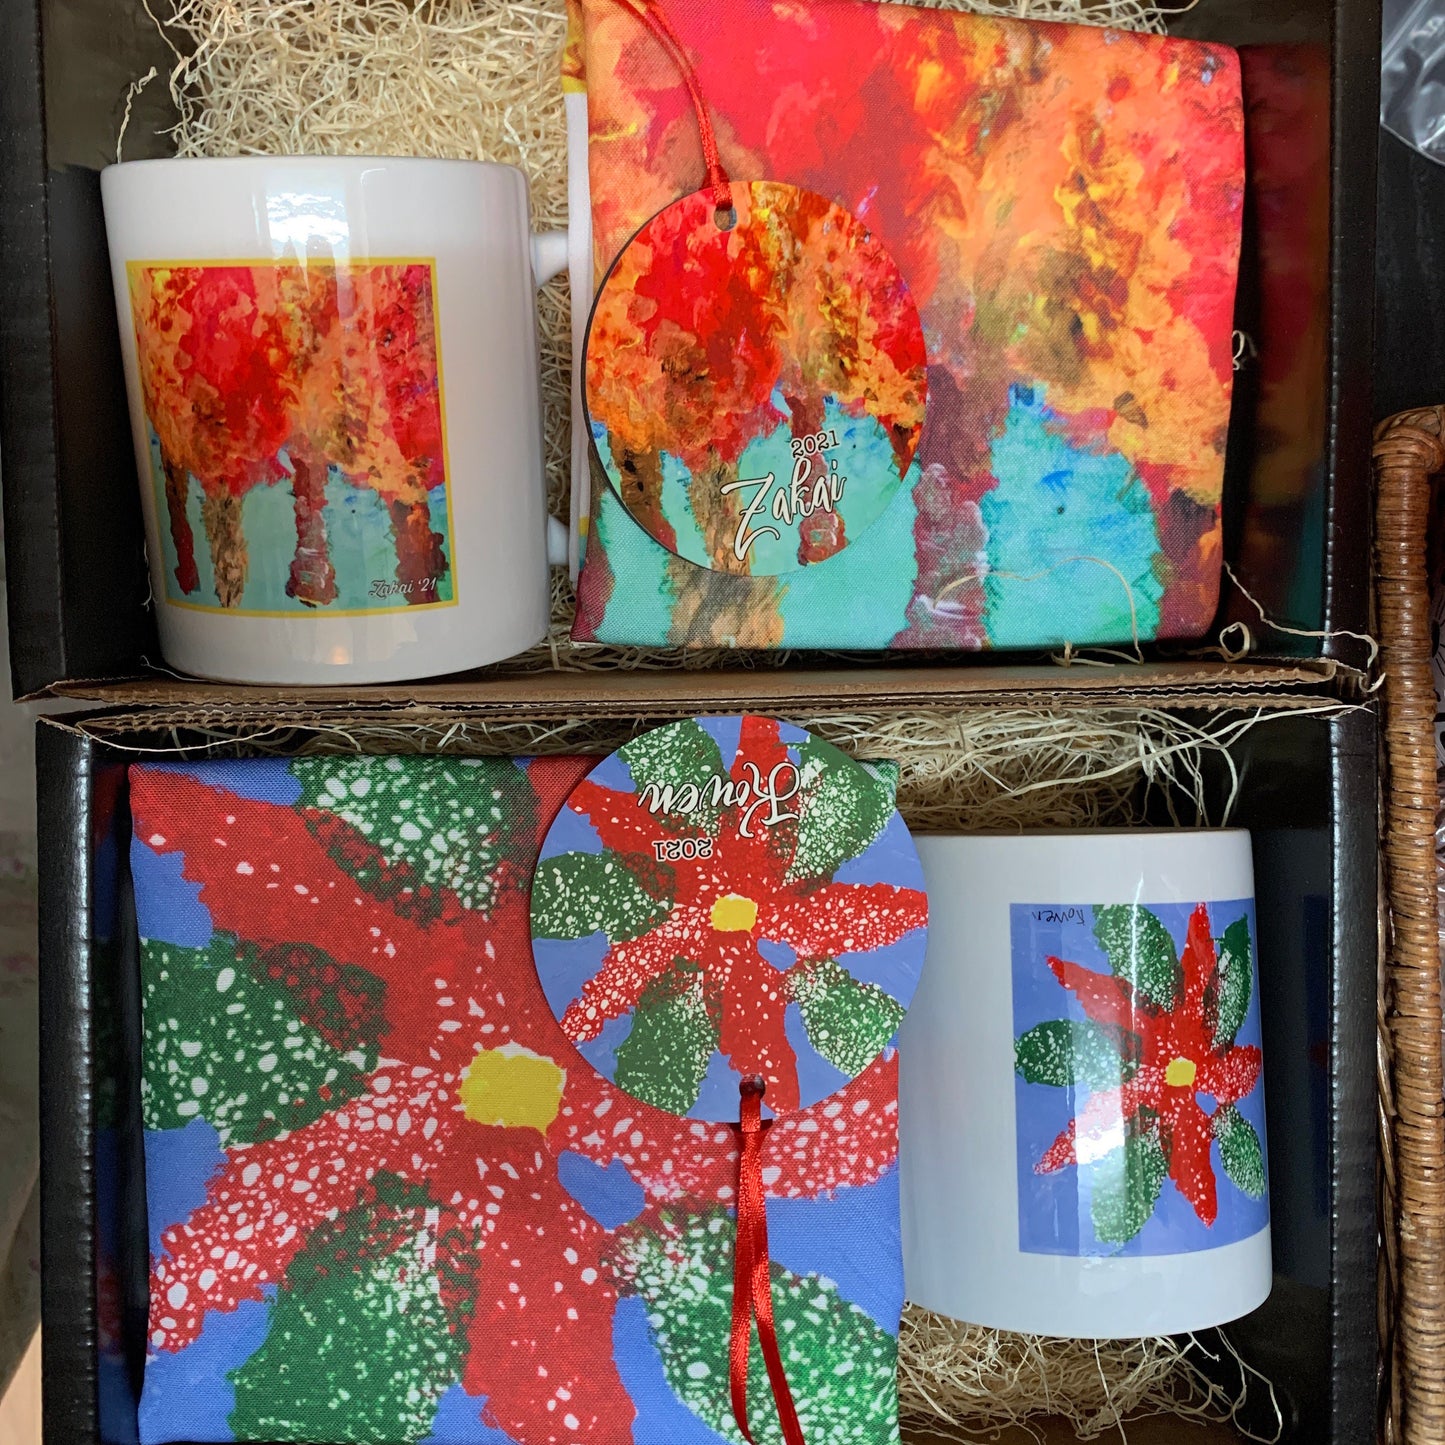 Personalized Gift for Artists, Artist Box Ideas